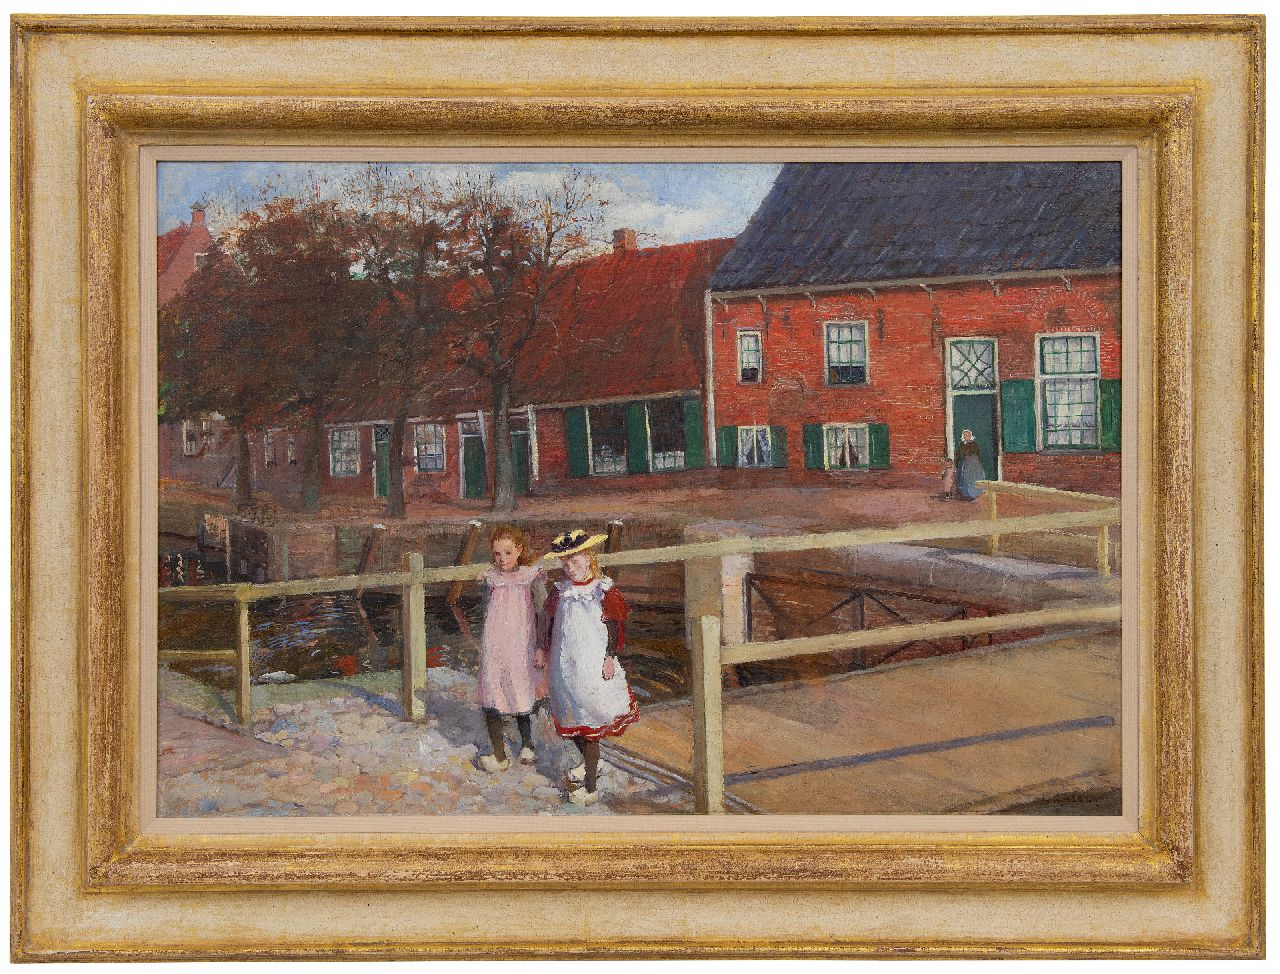 Koster J.P.C.A.  | Johanna Petronella Catharina Antoinetta 'Jo' Koster | Paintings offered for sale | Girls on a Sunday stroll, Hasselt, oil on canvas 49.3 x 72.1 cm, signed l.r. and ca. 1901